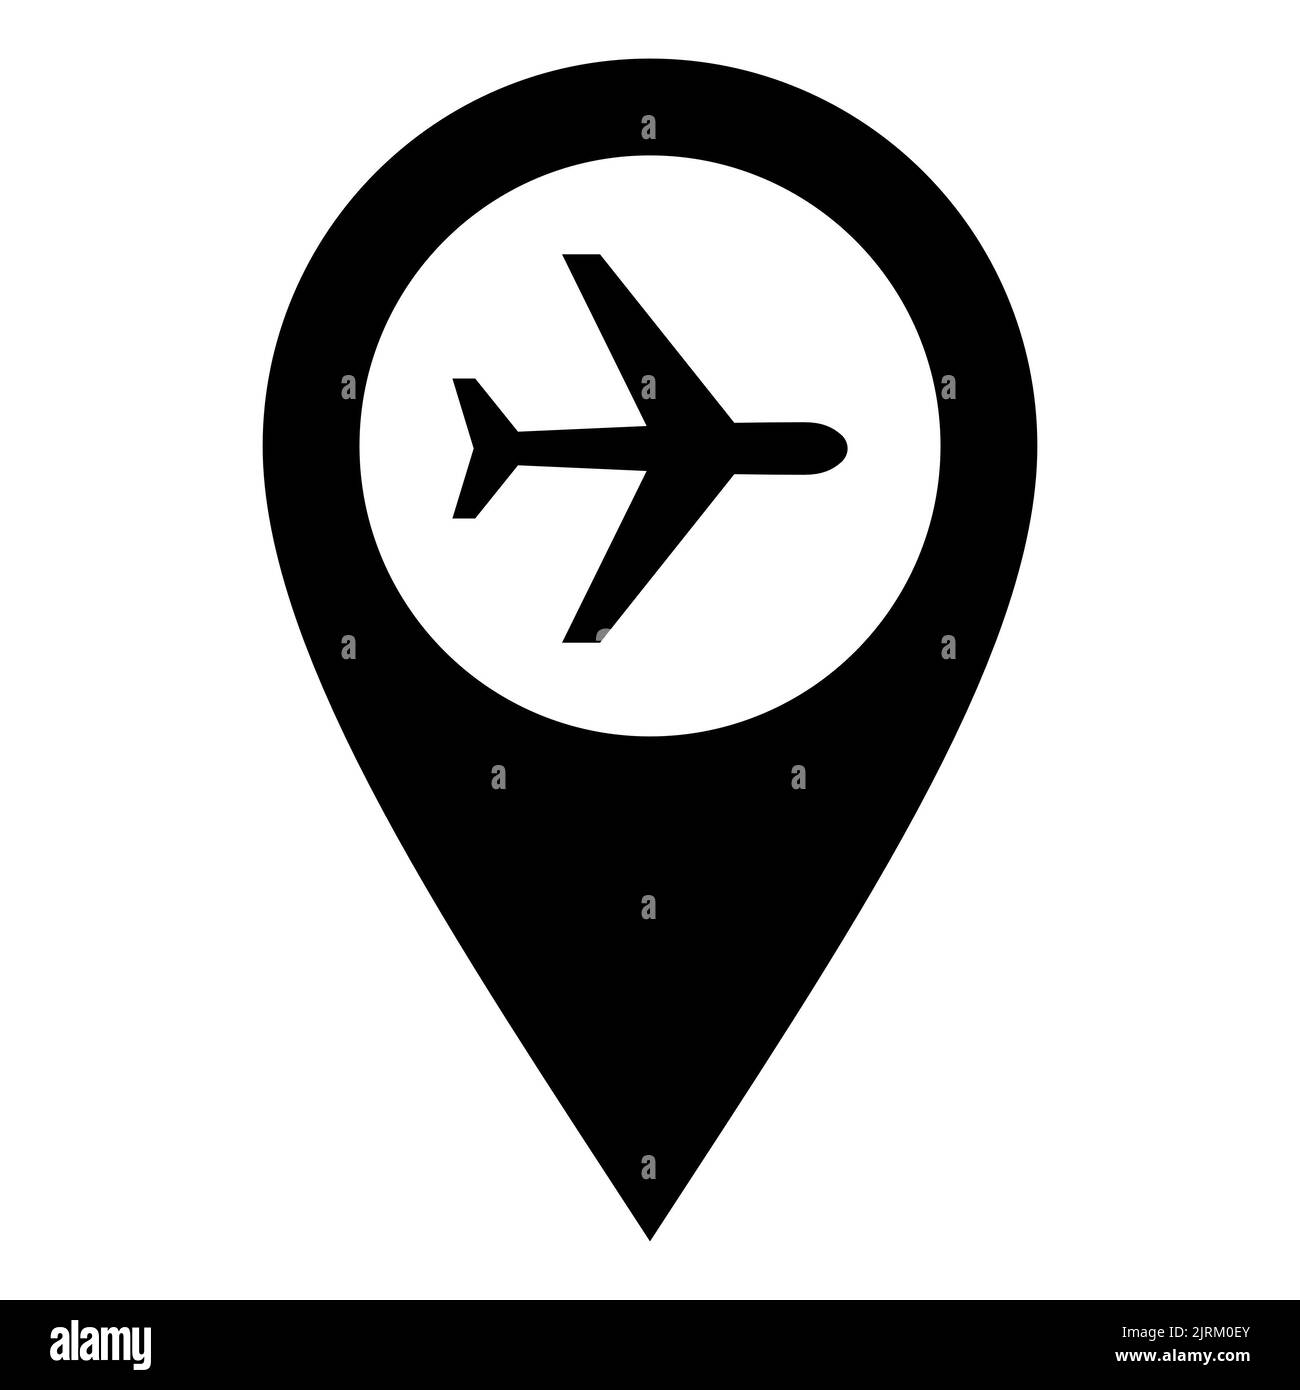 Airplane and location pin Stock Photo